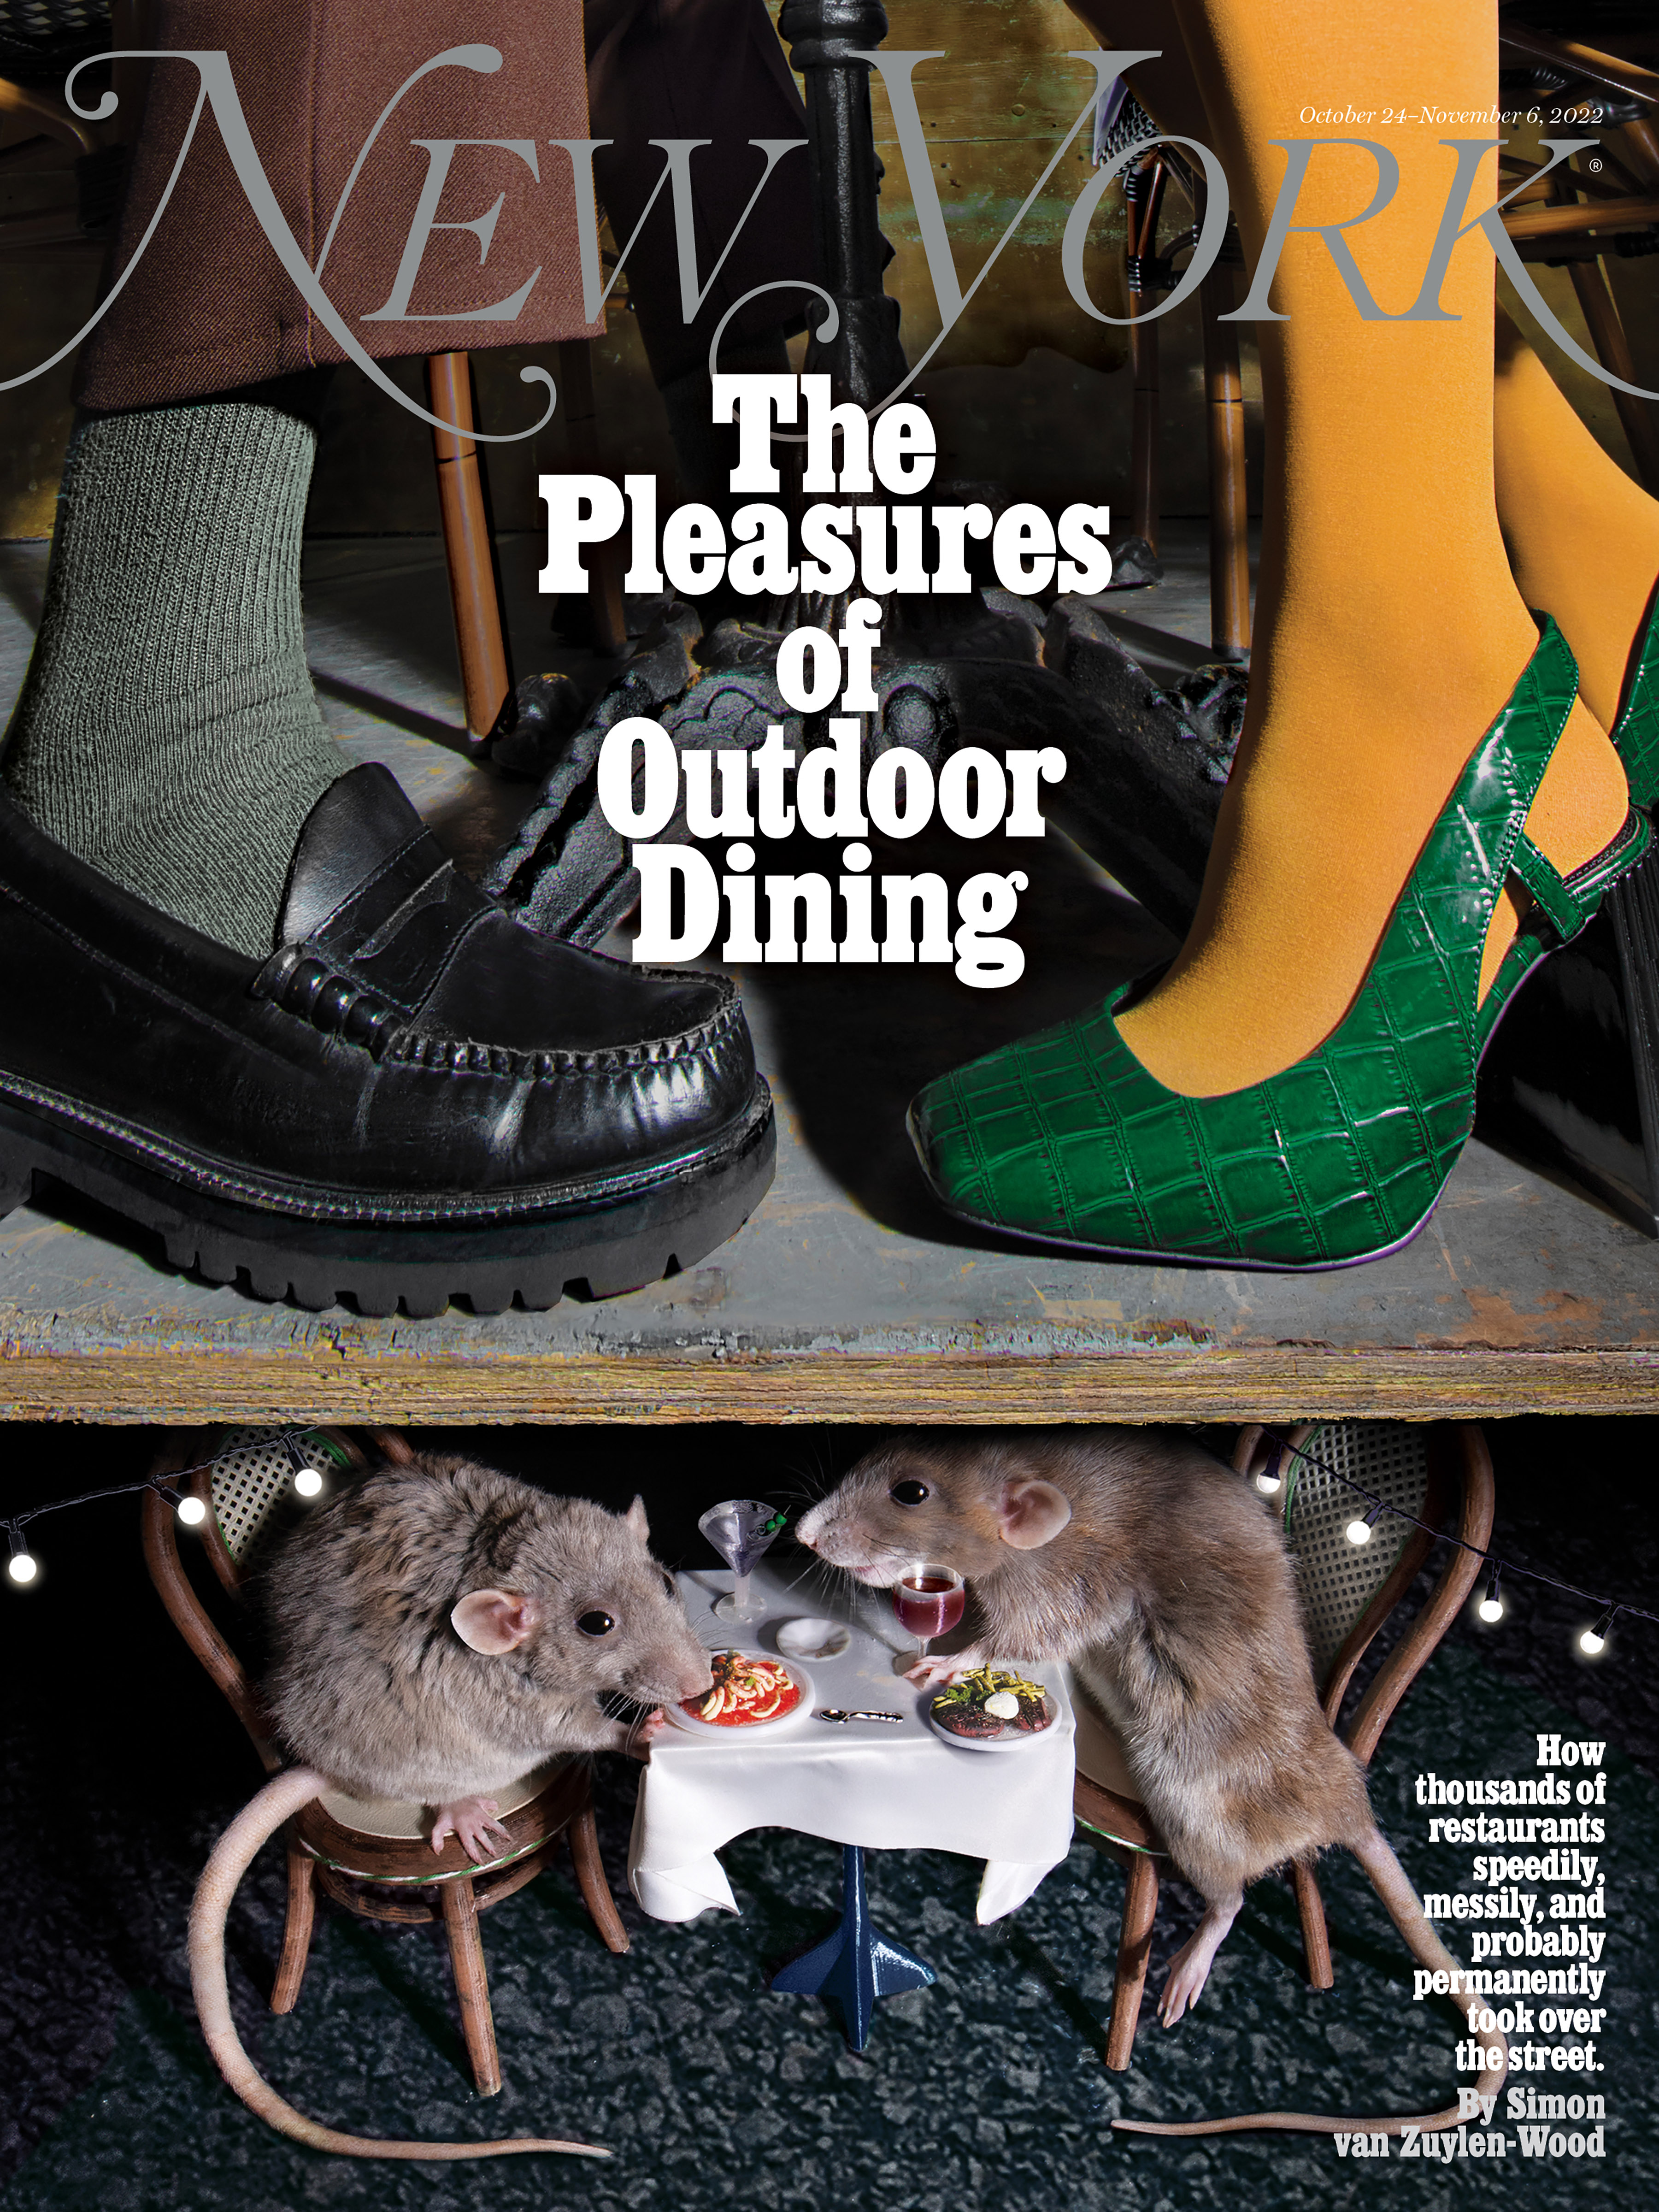 New York - “The Pleasures of Outdoor Dining” October 24–November 6, 2022